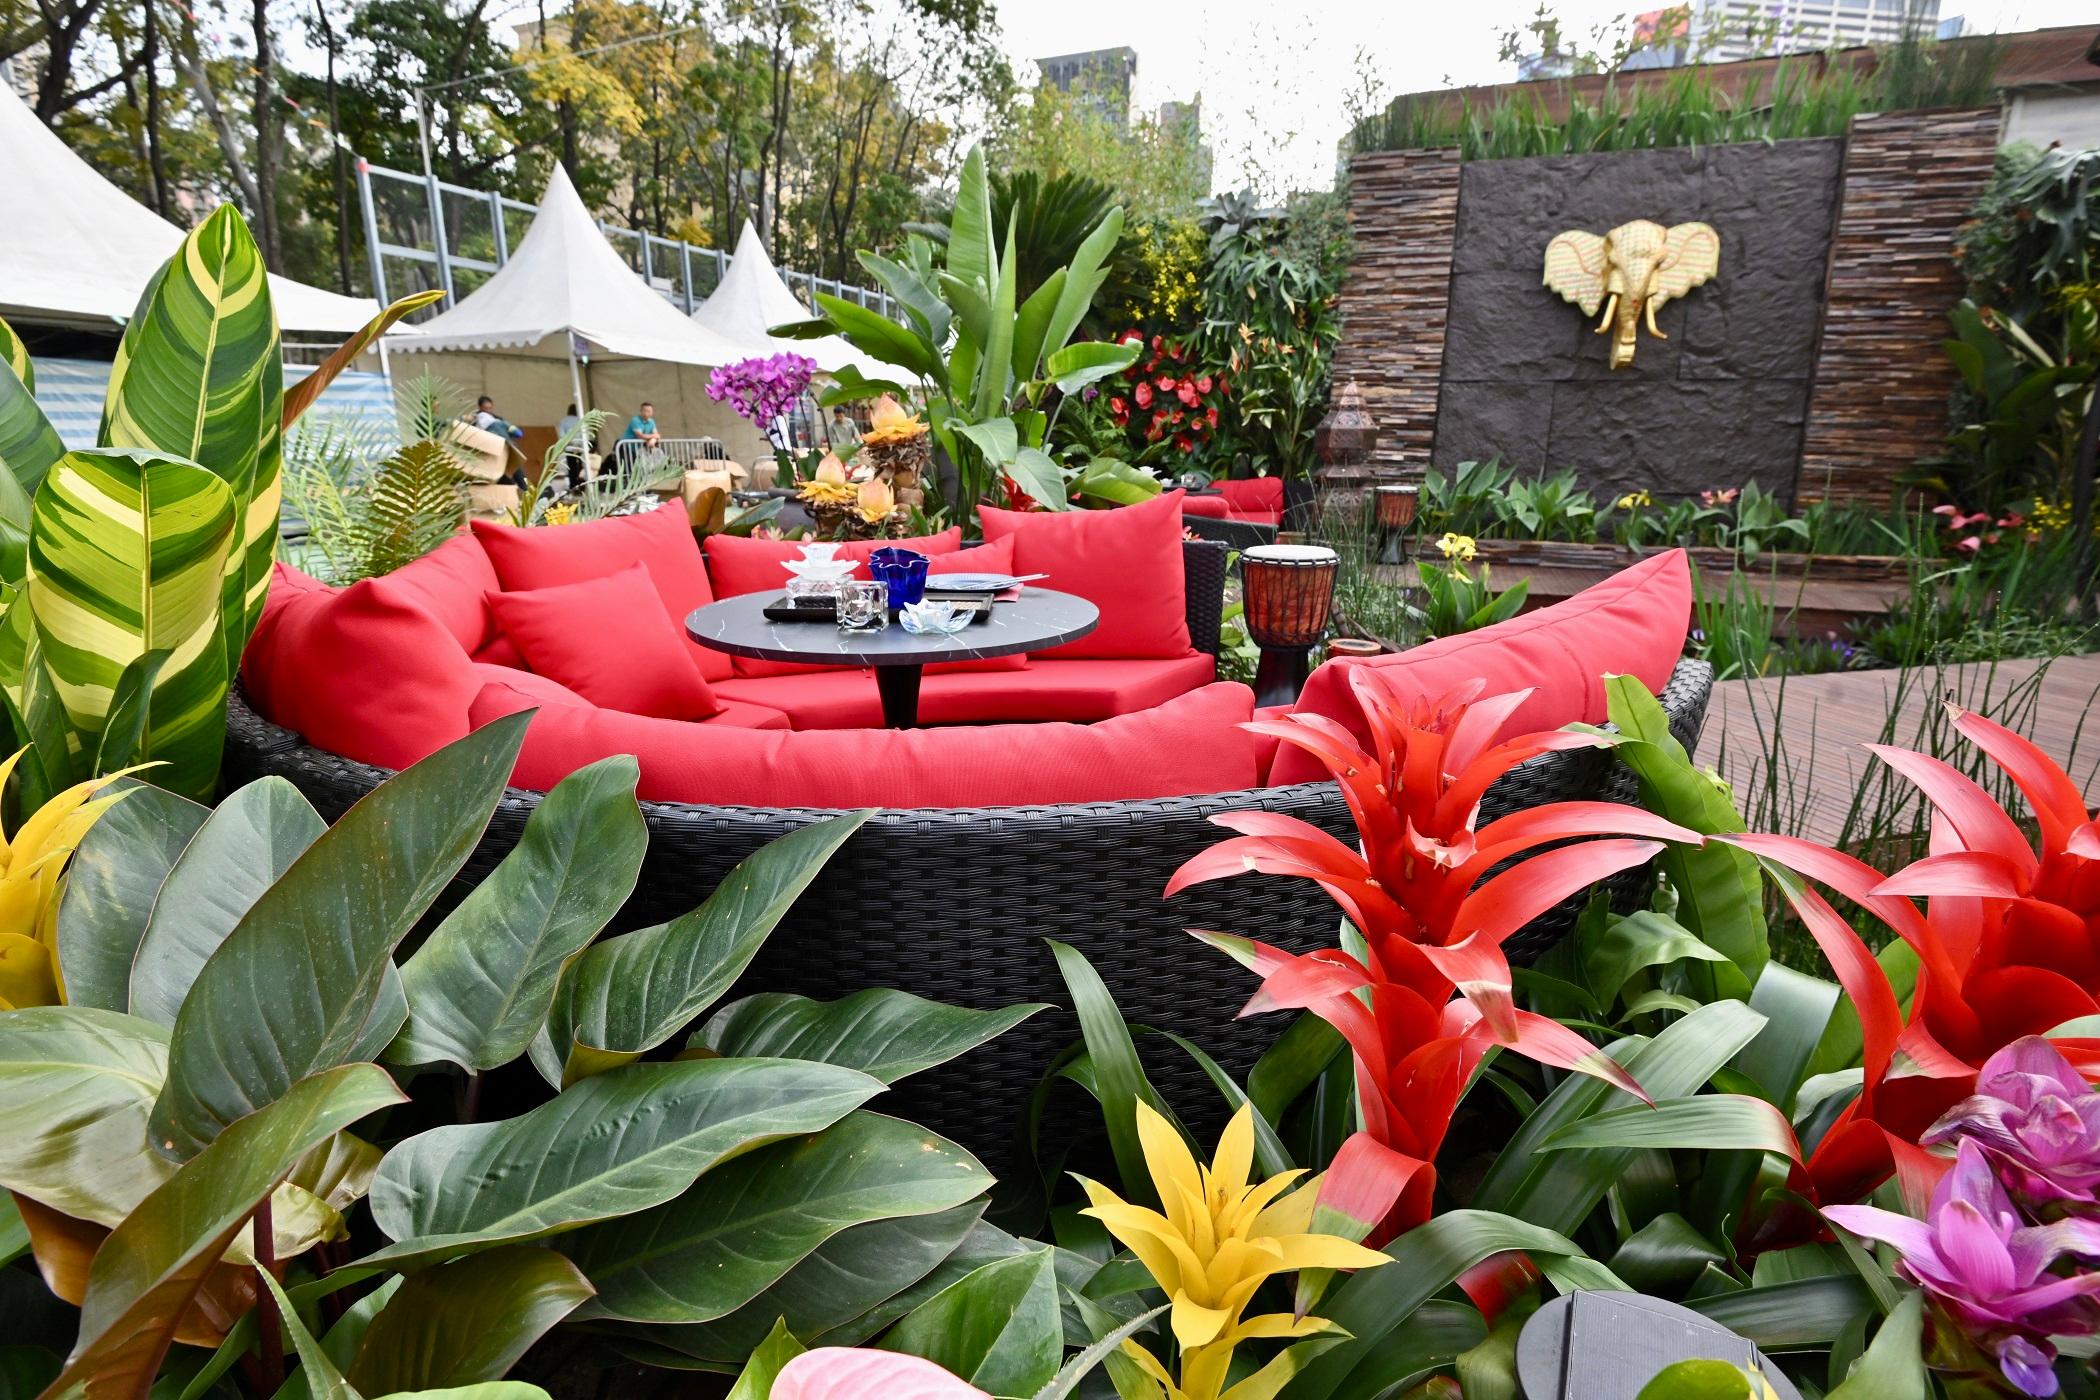 The winners of the plant exhibit competition, which is one of the major activities of the Hong Kong Flower Show, were announced today (March 11). Photo shows the winning garden plot of the Leisure and Cultural Services Department Oriental Style Garden Plot Competition.

